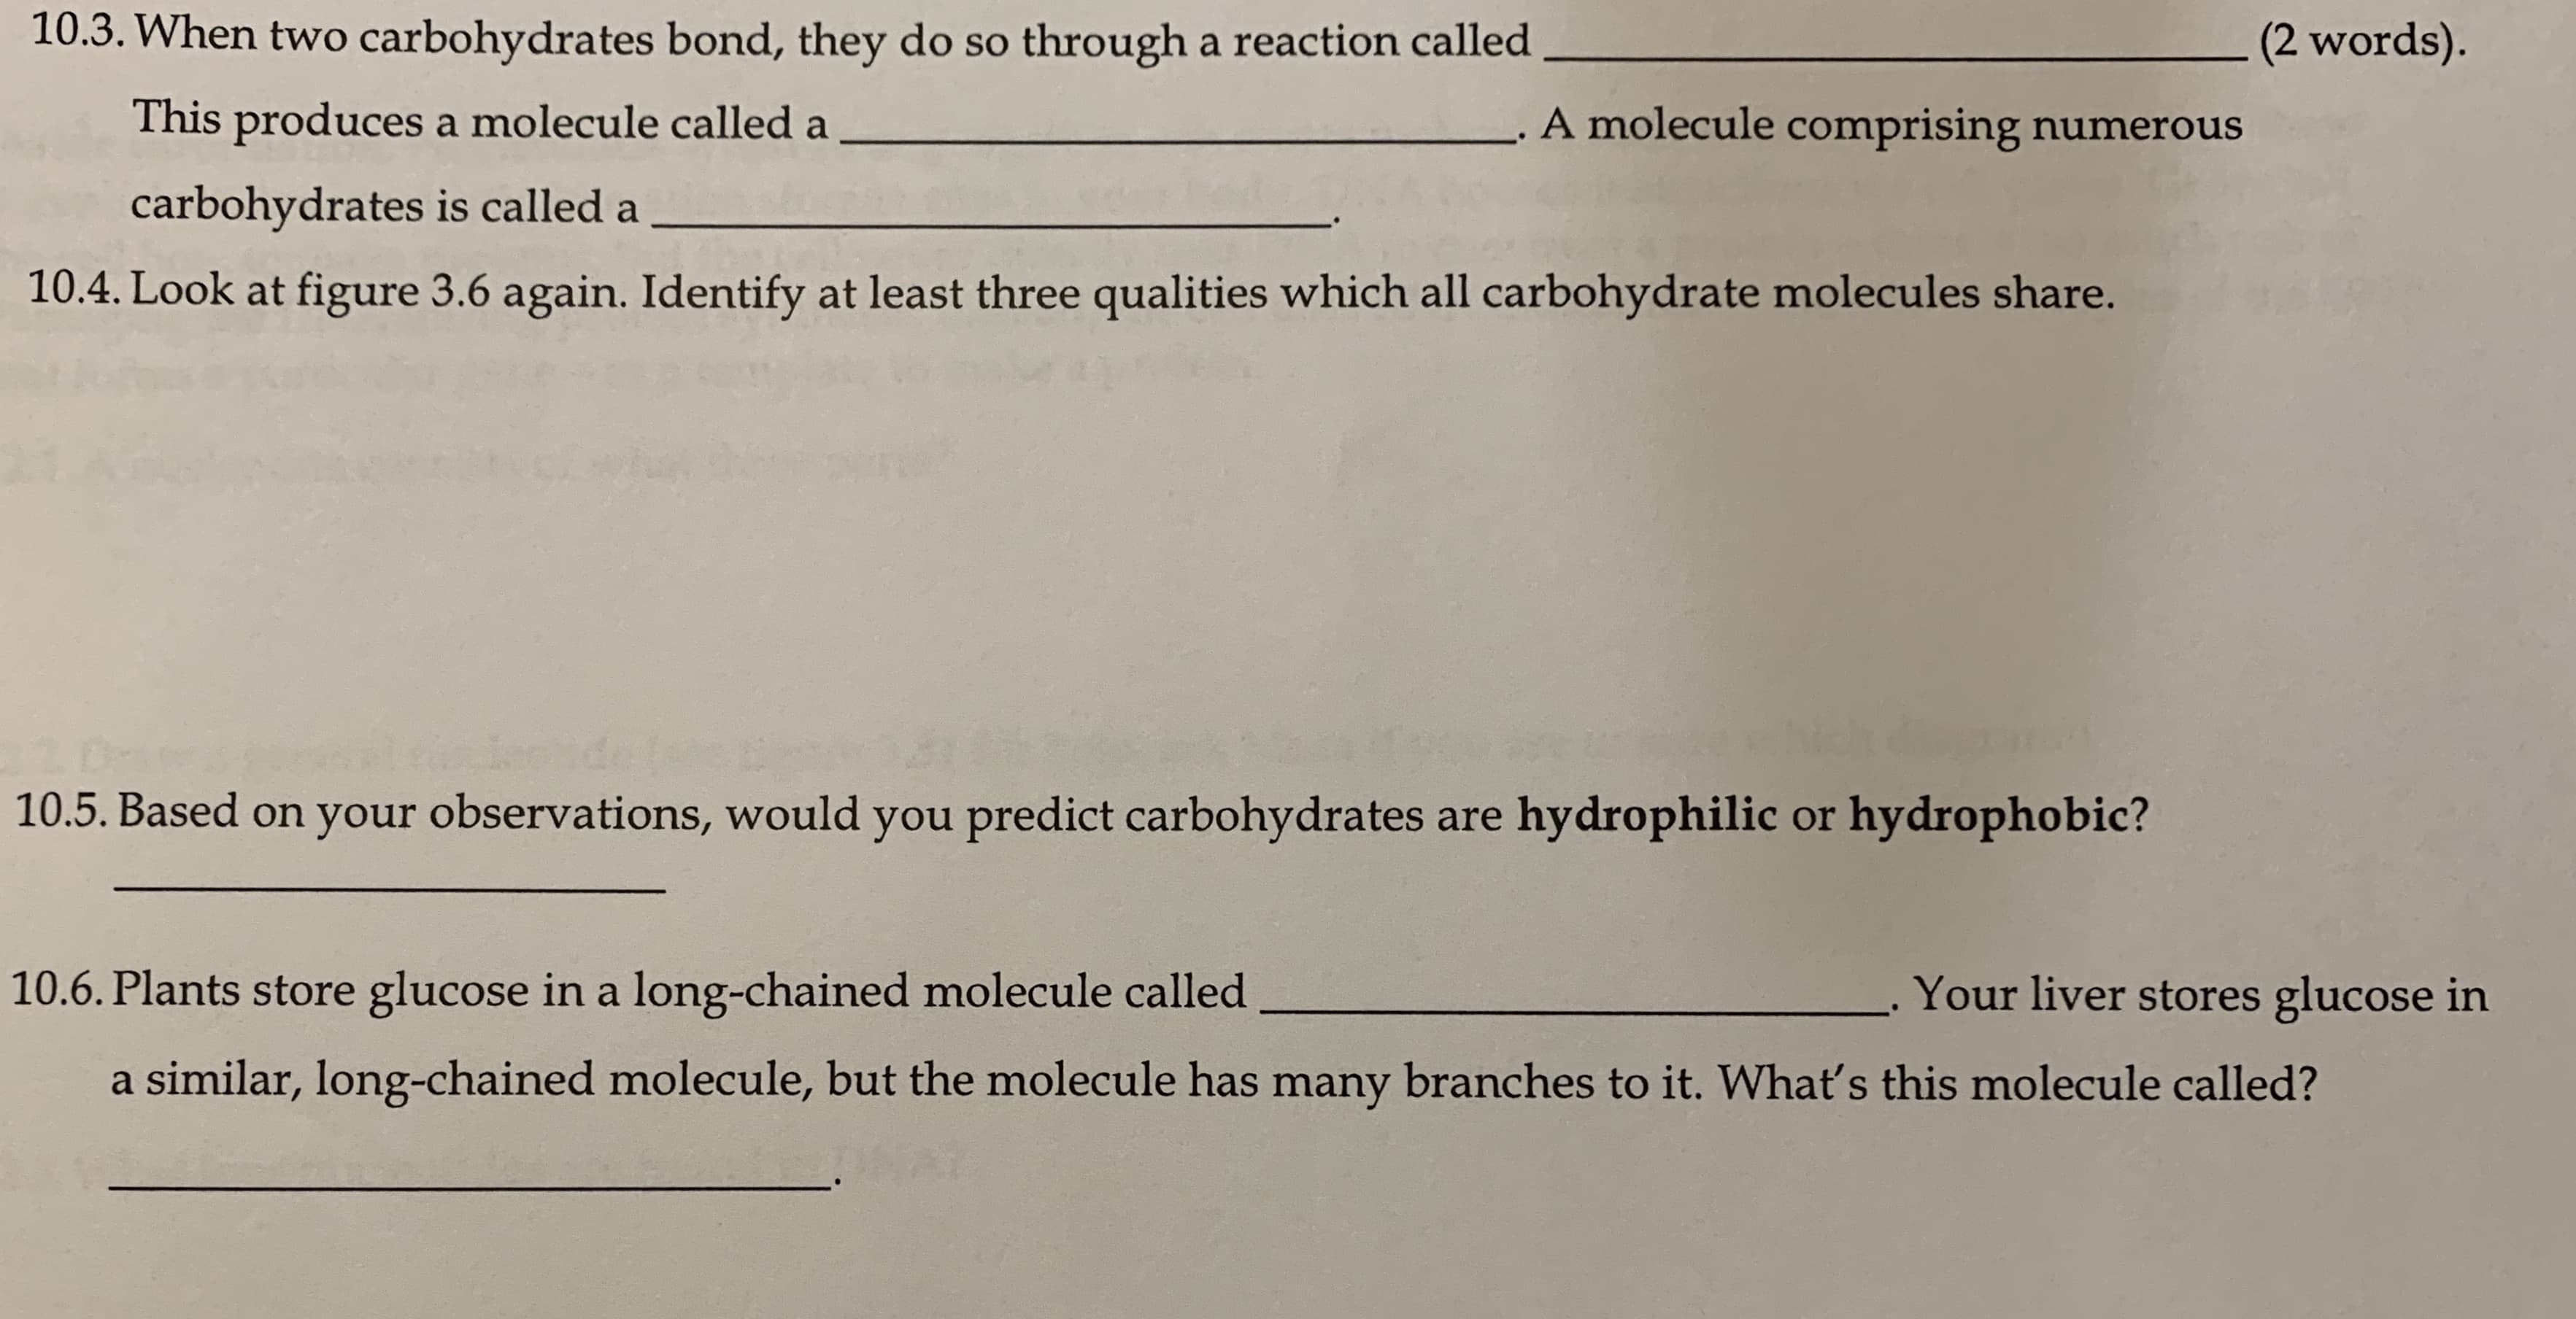 10.3. When two carbohydrates bond, they do so through a reaction called
(2 words).
This produces a molecule called a
A molecule comprising numerous
carbohydrates is called a
10.4. Look at figure 3.6 again. Identify at least three qualities which all carbohydrate molecules share.
10.5. Based on your observations, would you predict carbohydrates are hydrophilic or hydrophobic?
10.6. Plants store glucose in a long-chained molecule called
Your liver stores glucose in
a similar, long-chained molecule, but the molecule has many branches to it. What's this molecule called?
